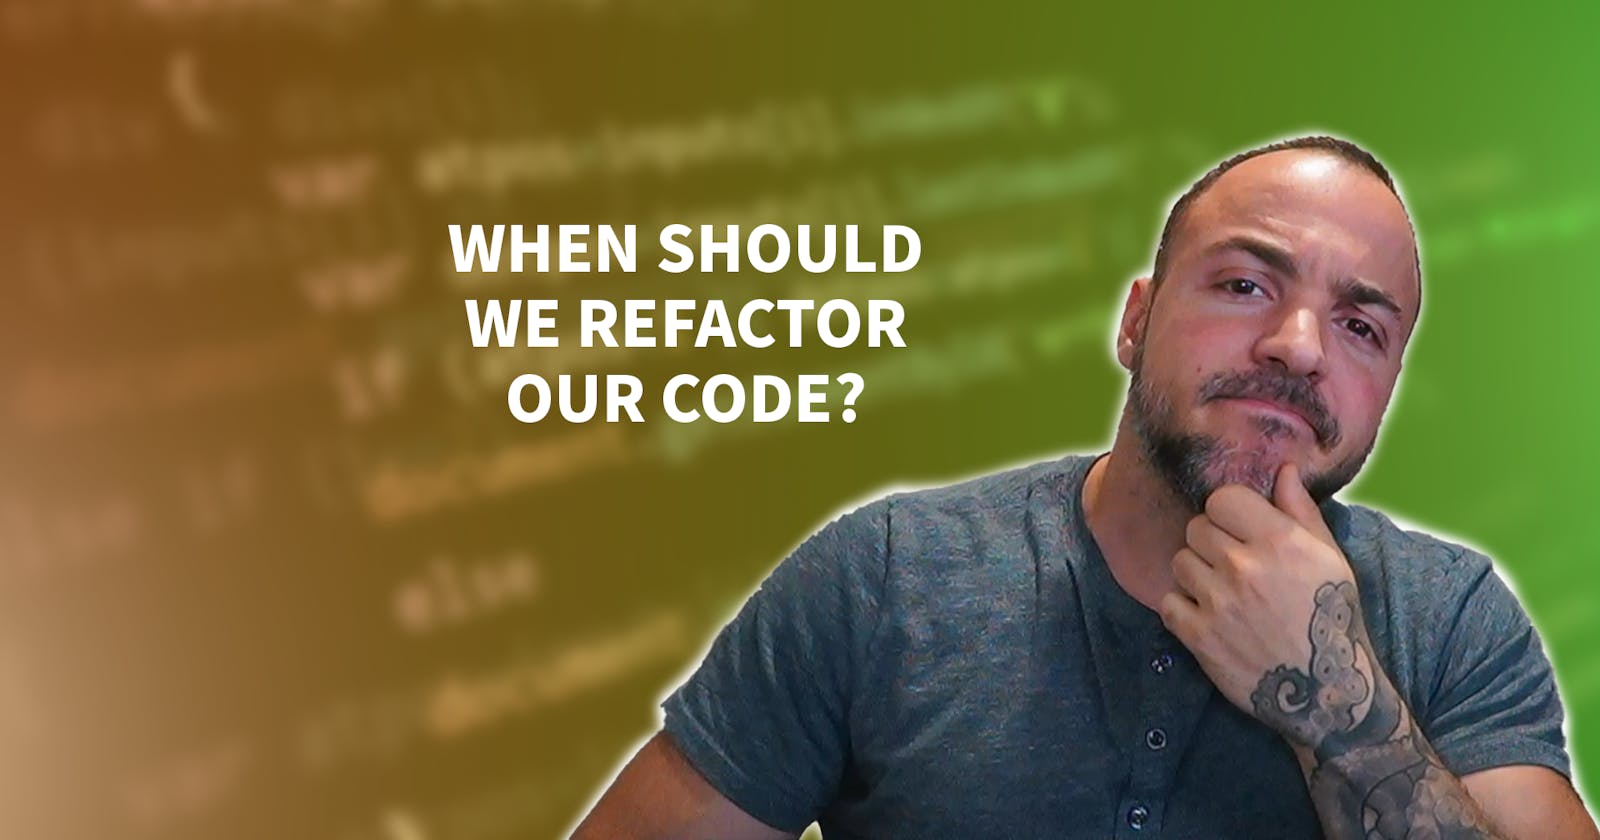 When To Refactor Code - How To Maximize Efficiency and Minimizing Tech Debt